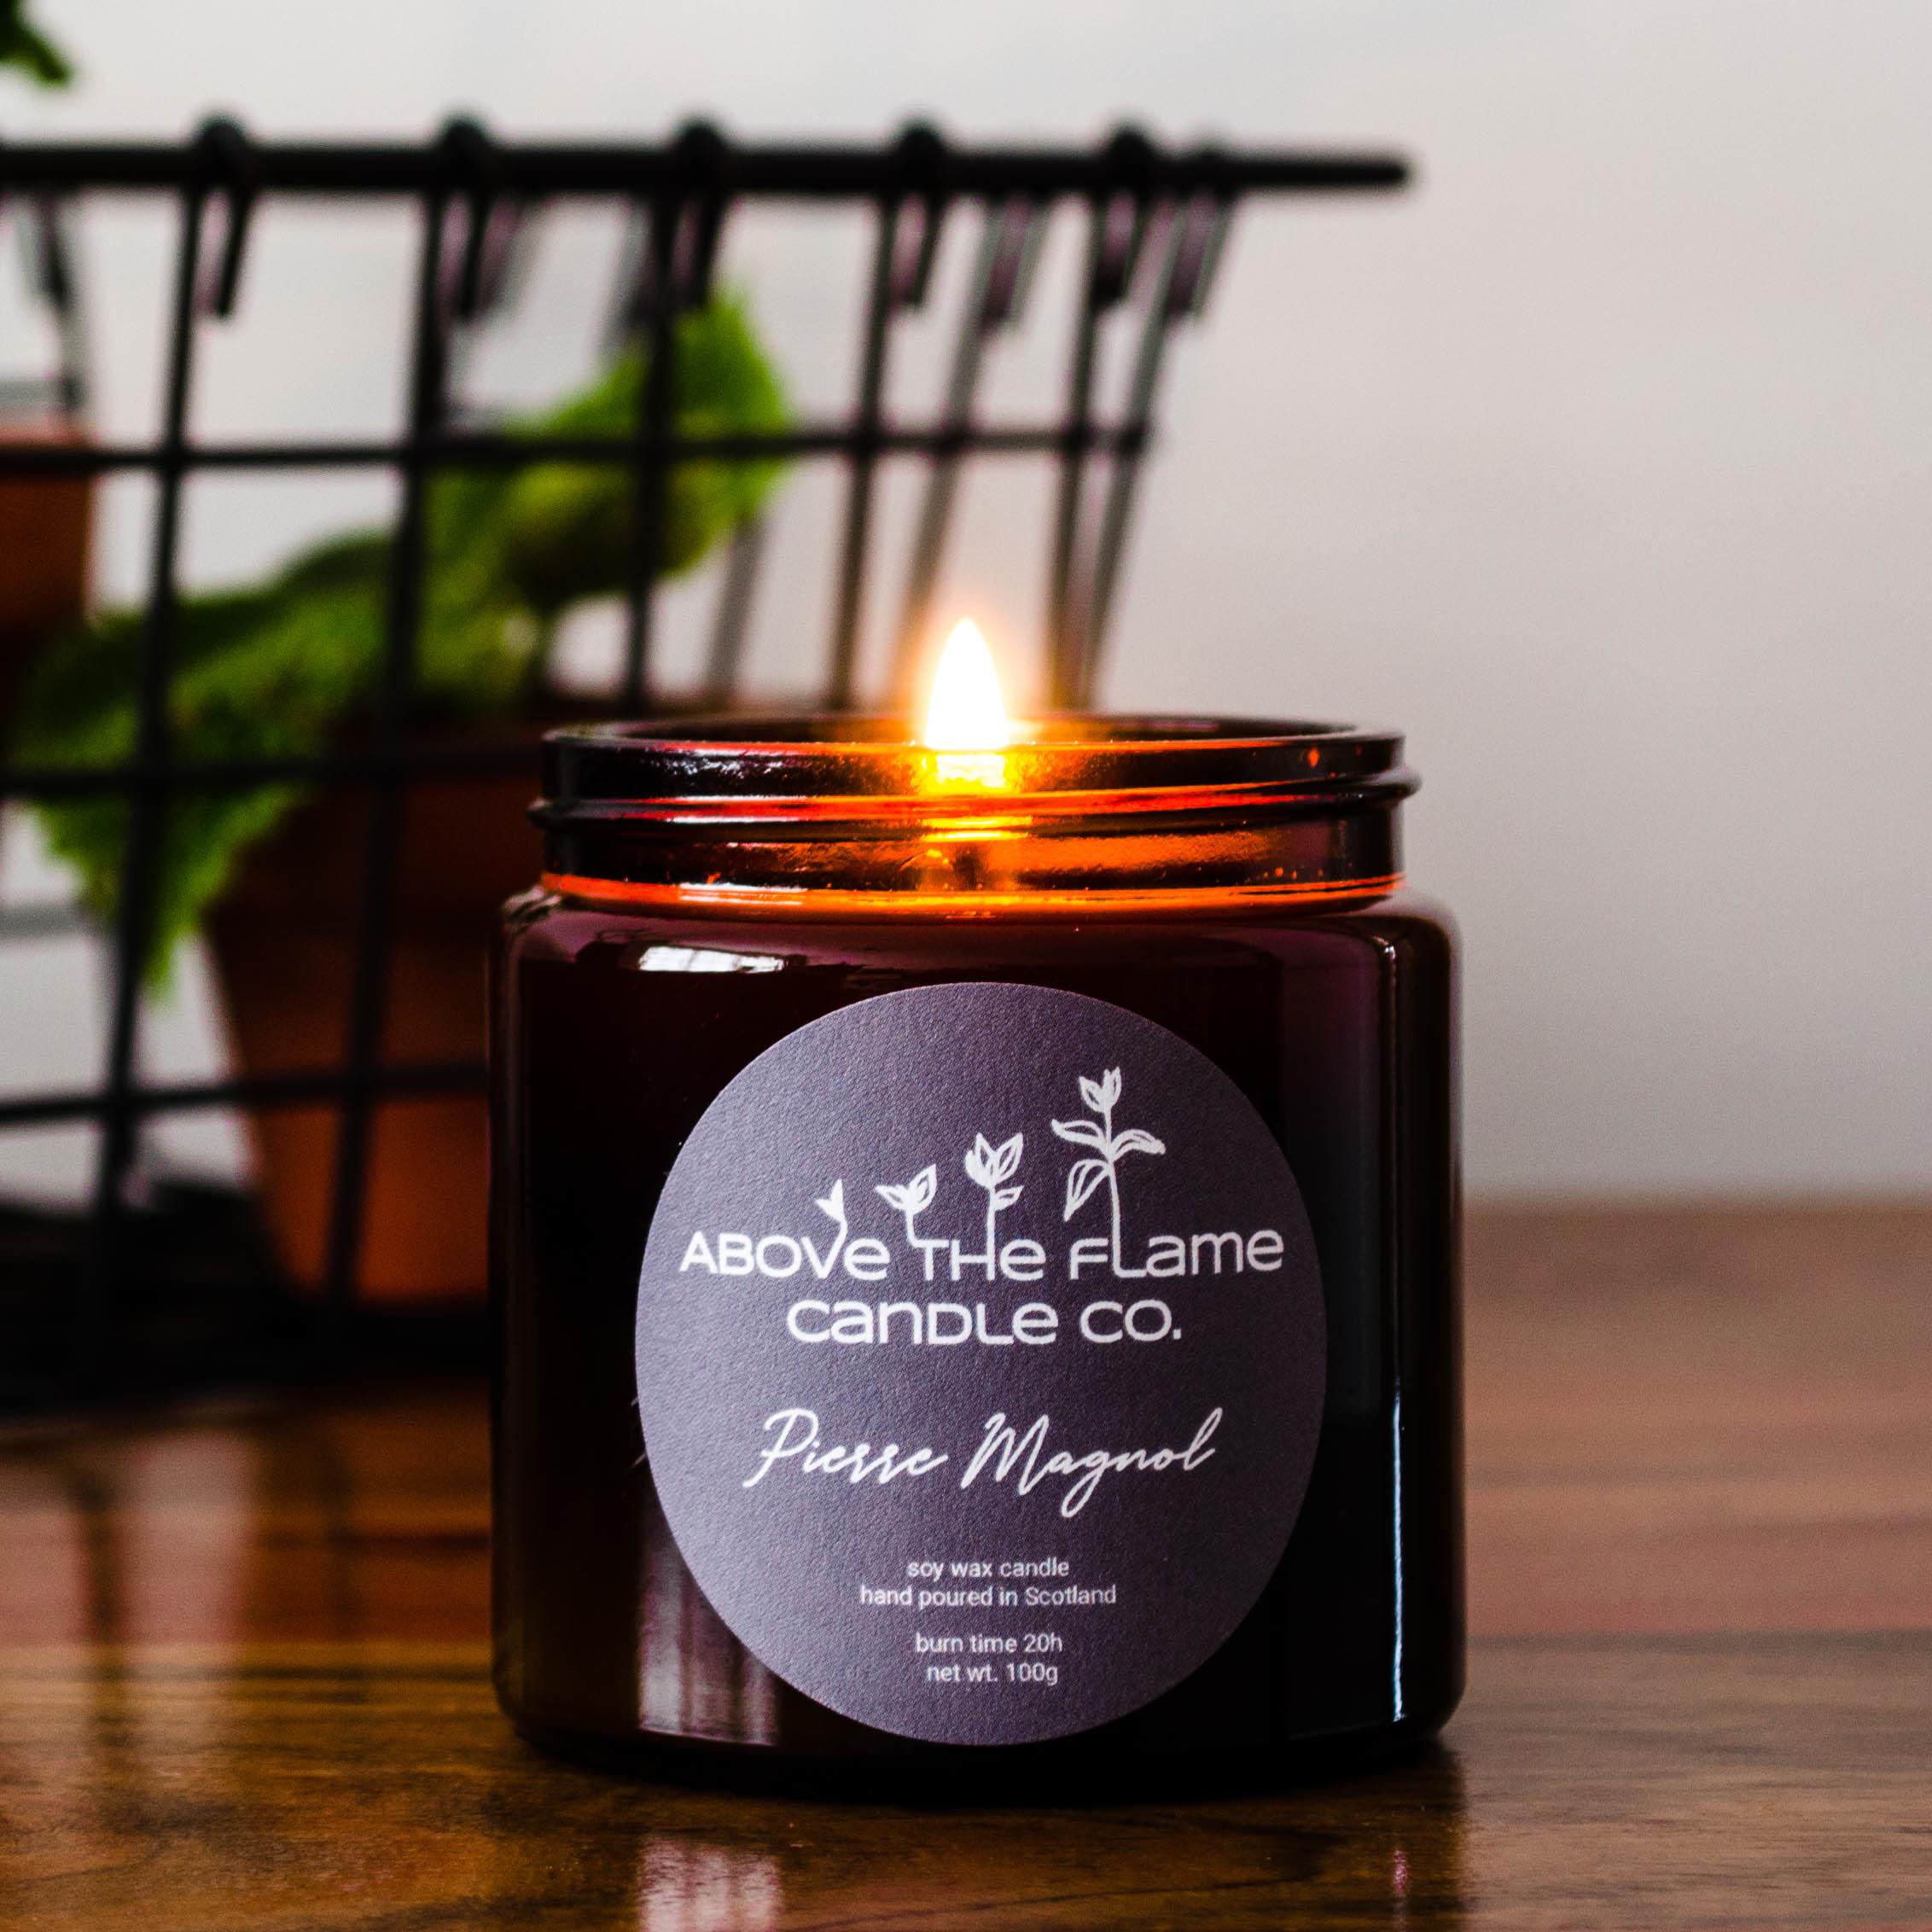 A lit pierre magnol amber soy wax candle jar handmade by above the flame candle Co on a wooden table